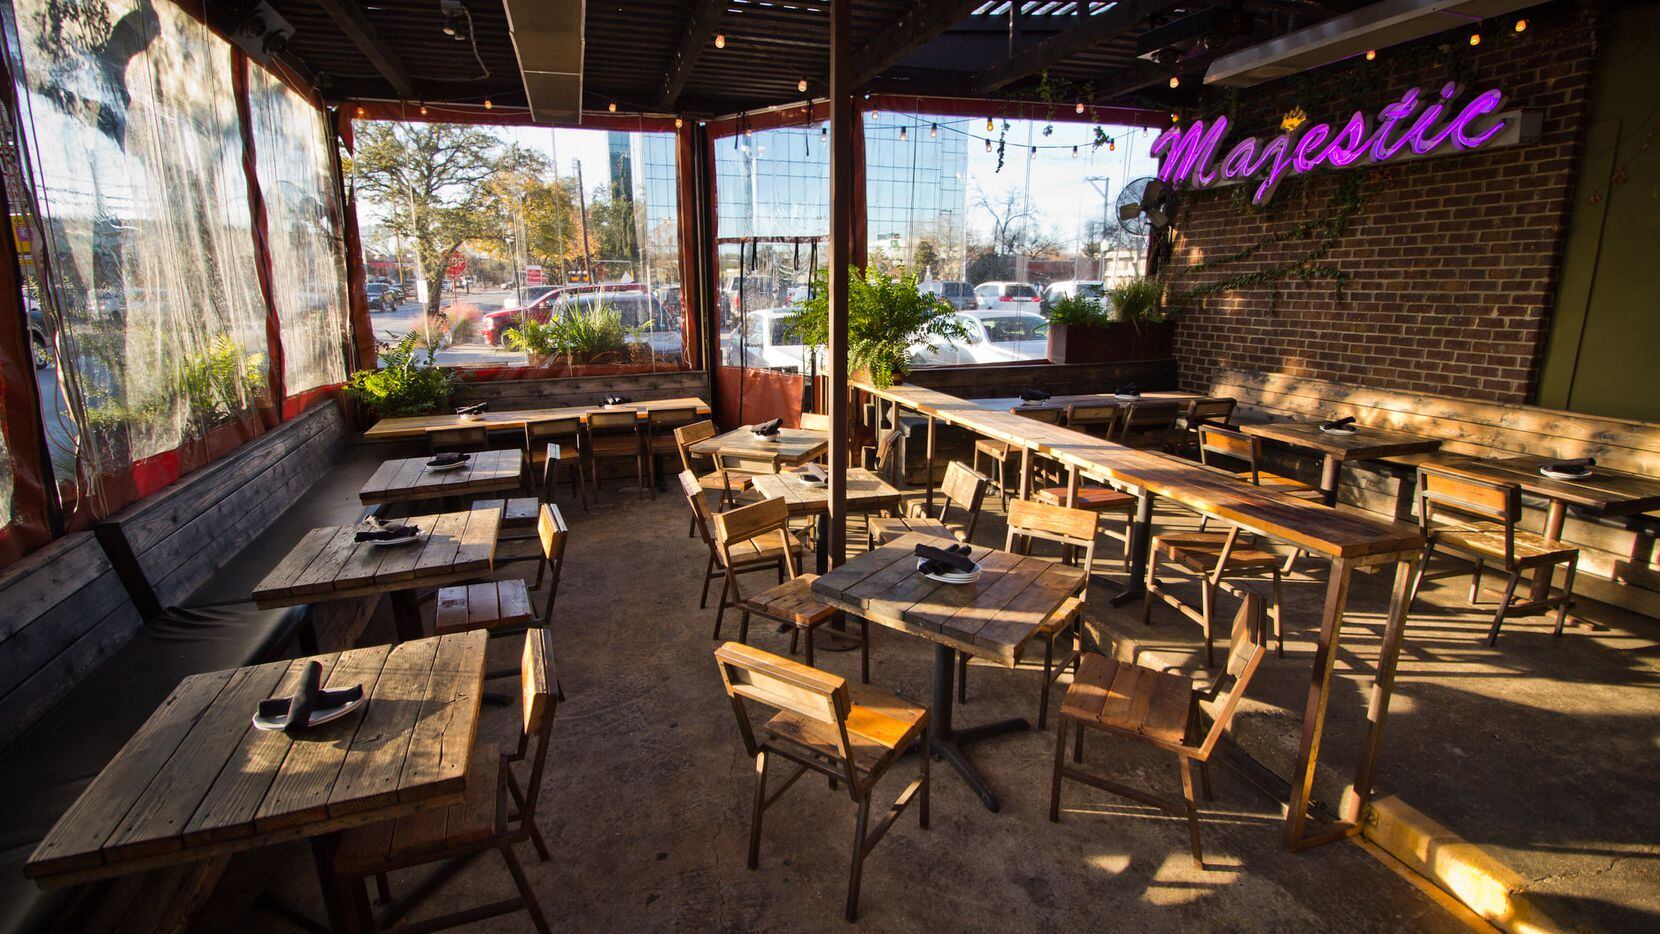 Henry's Majestic, and Uptown Dallas patio restaurant and popular brunch spot, will close...